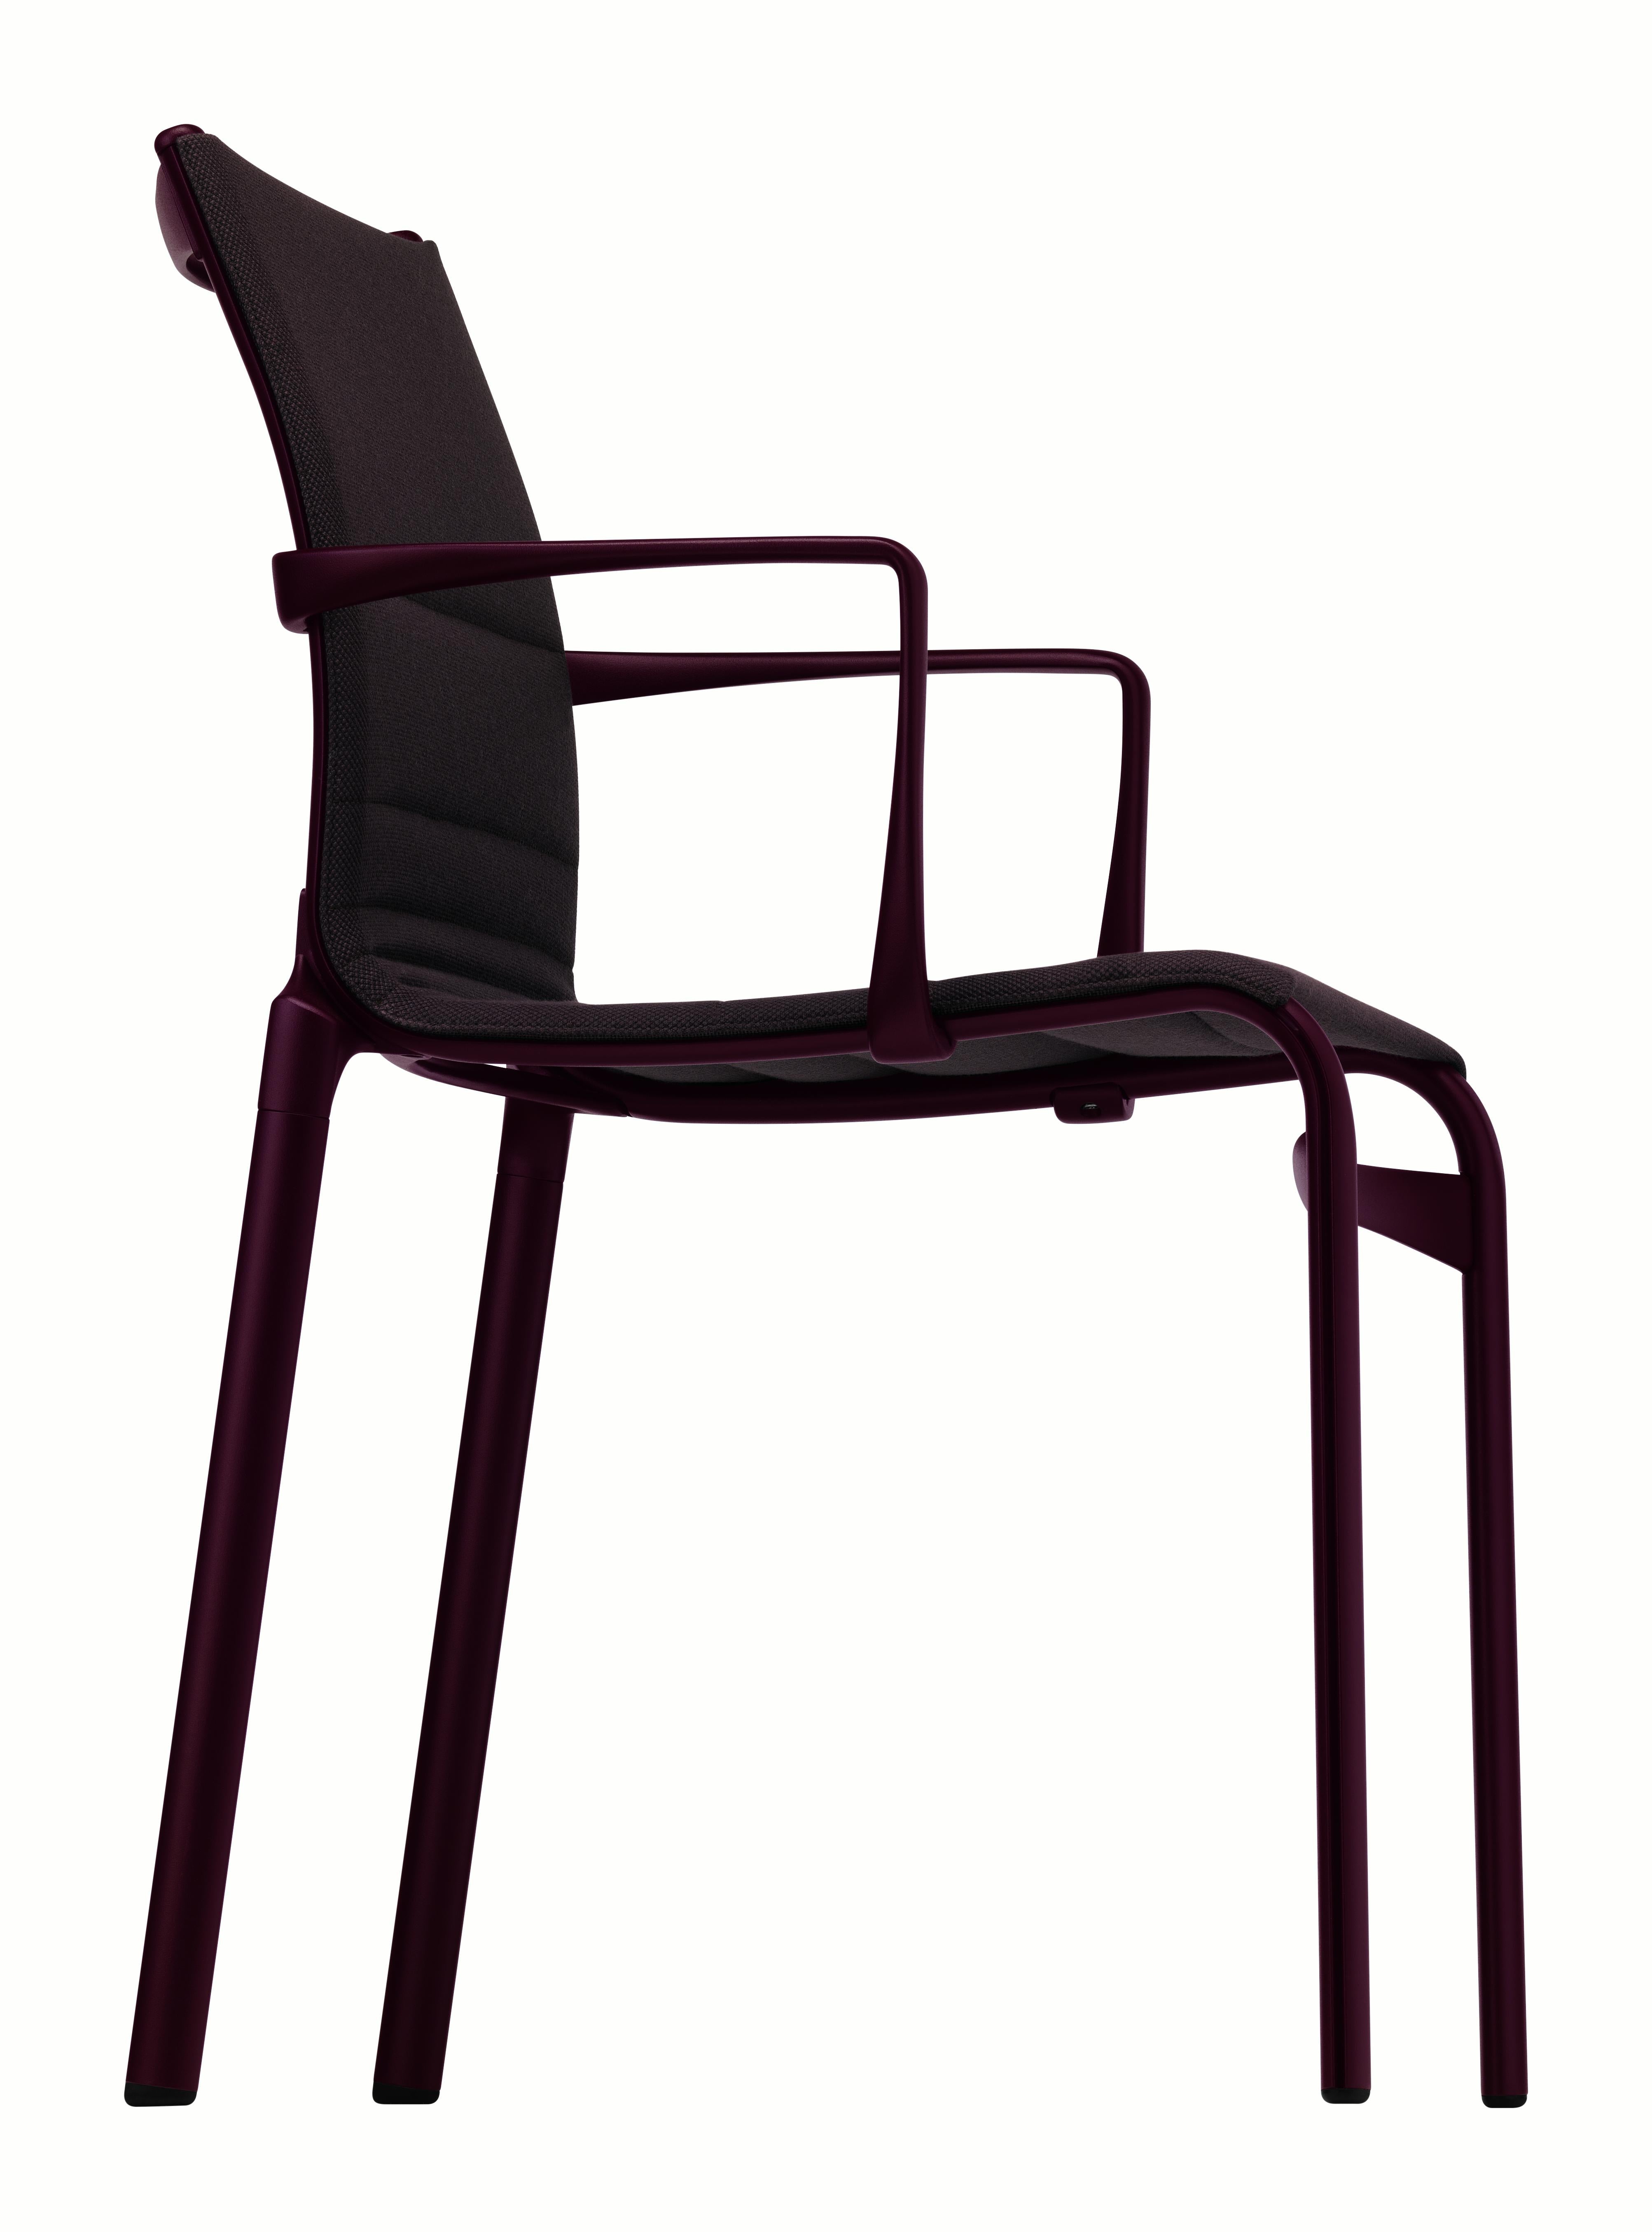 Alias Bigframe 44 Armchair in Upholstery with Lacquered Aluminium Frame by Alberto Meda

Stacking chair with arms, structure composed of extruded aluminium profile and die-cast aluminium elements. Seat and back in fire retardant PVC covered